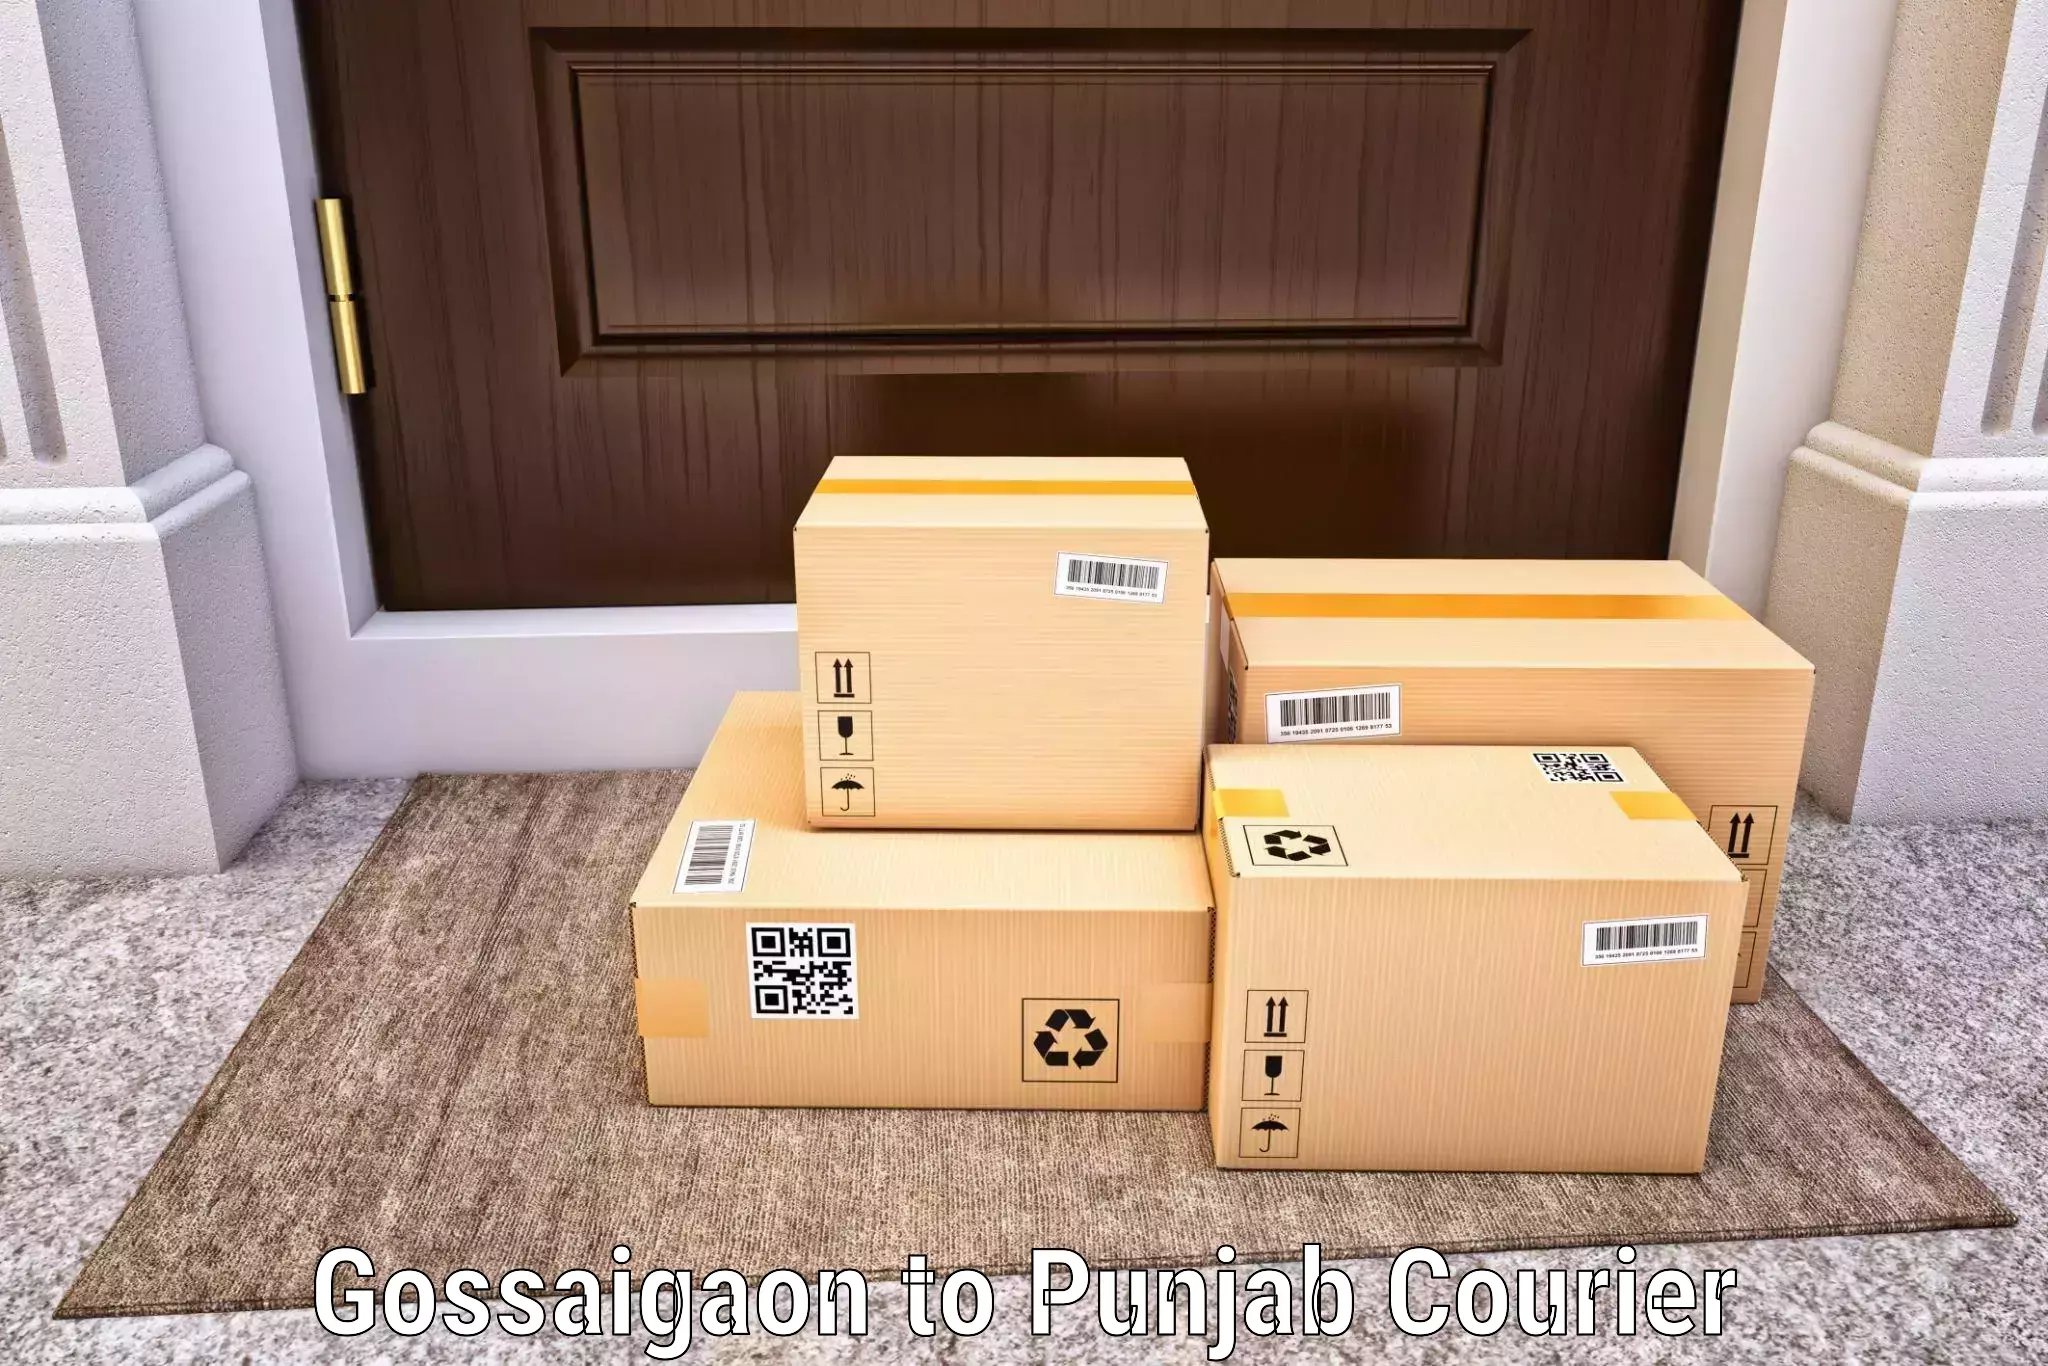 Professional courier services Gossaigaon to Nangal